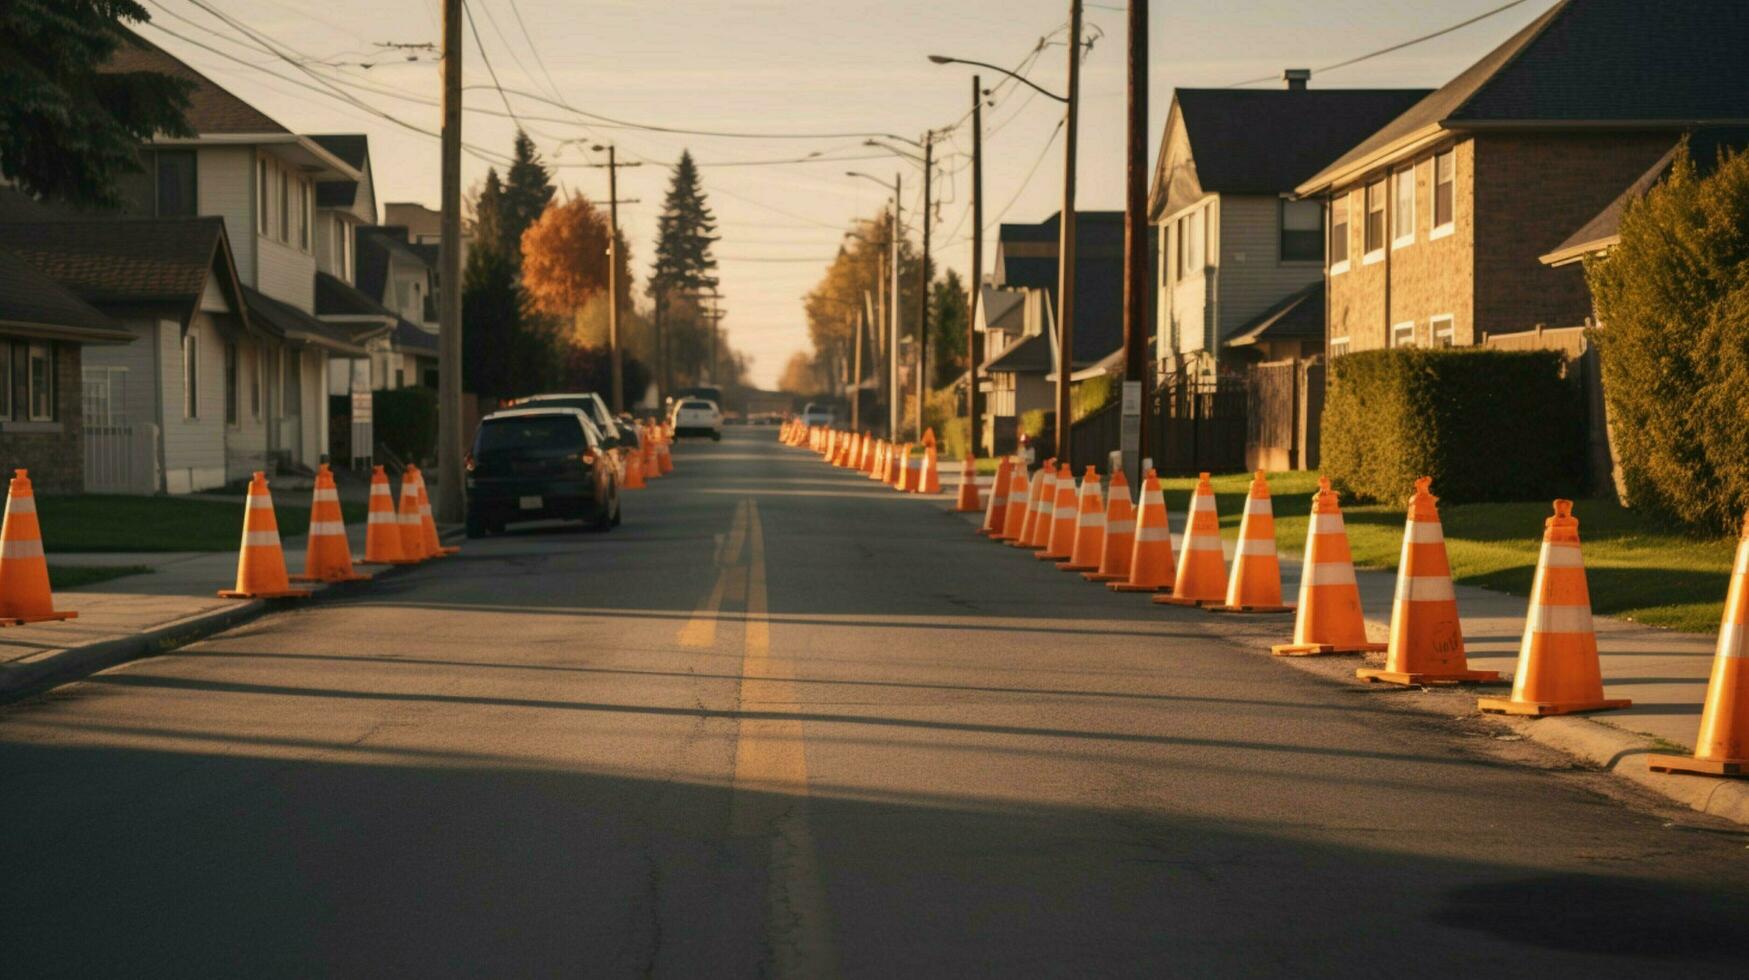 suburban street with line of traffic cones marking photo